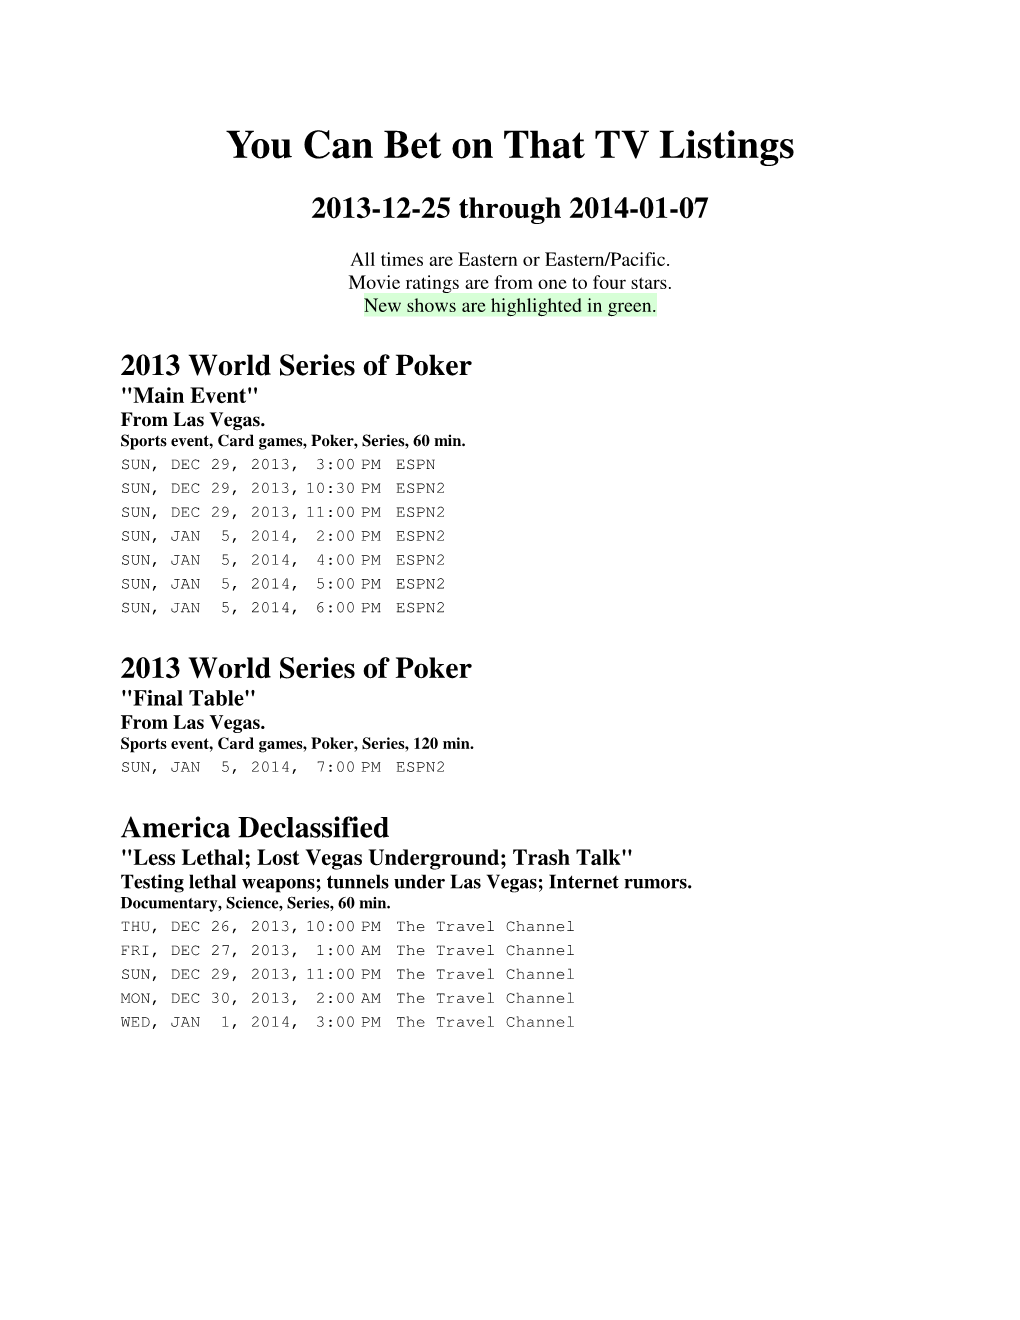 You Can Bet on That TV Listings 2013-12-25 Through 2014-01-07